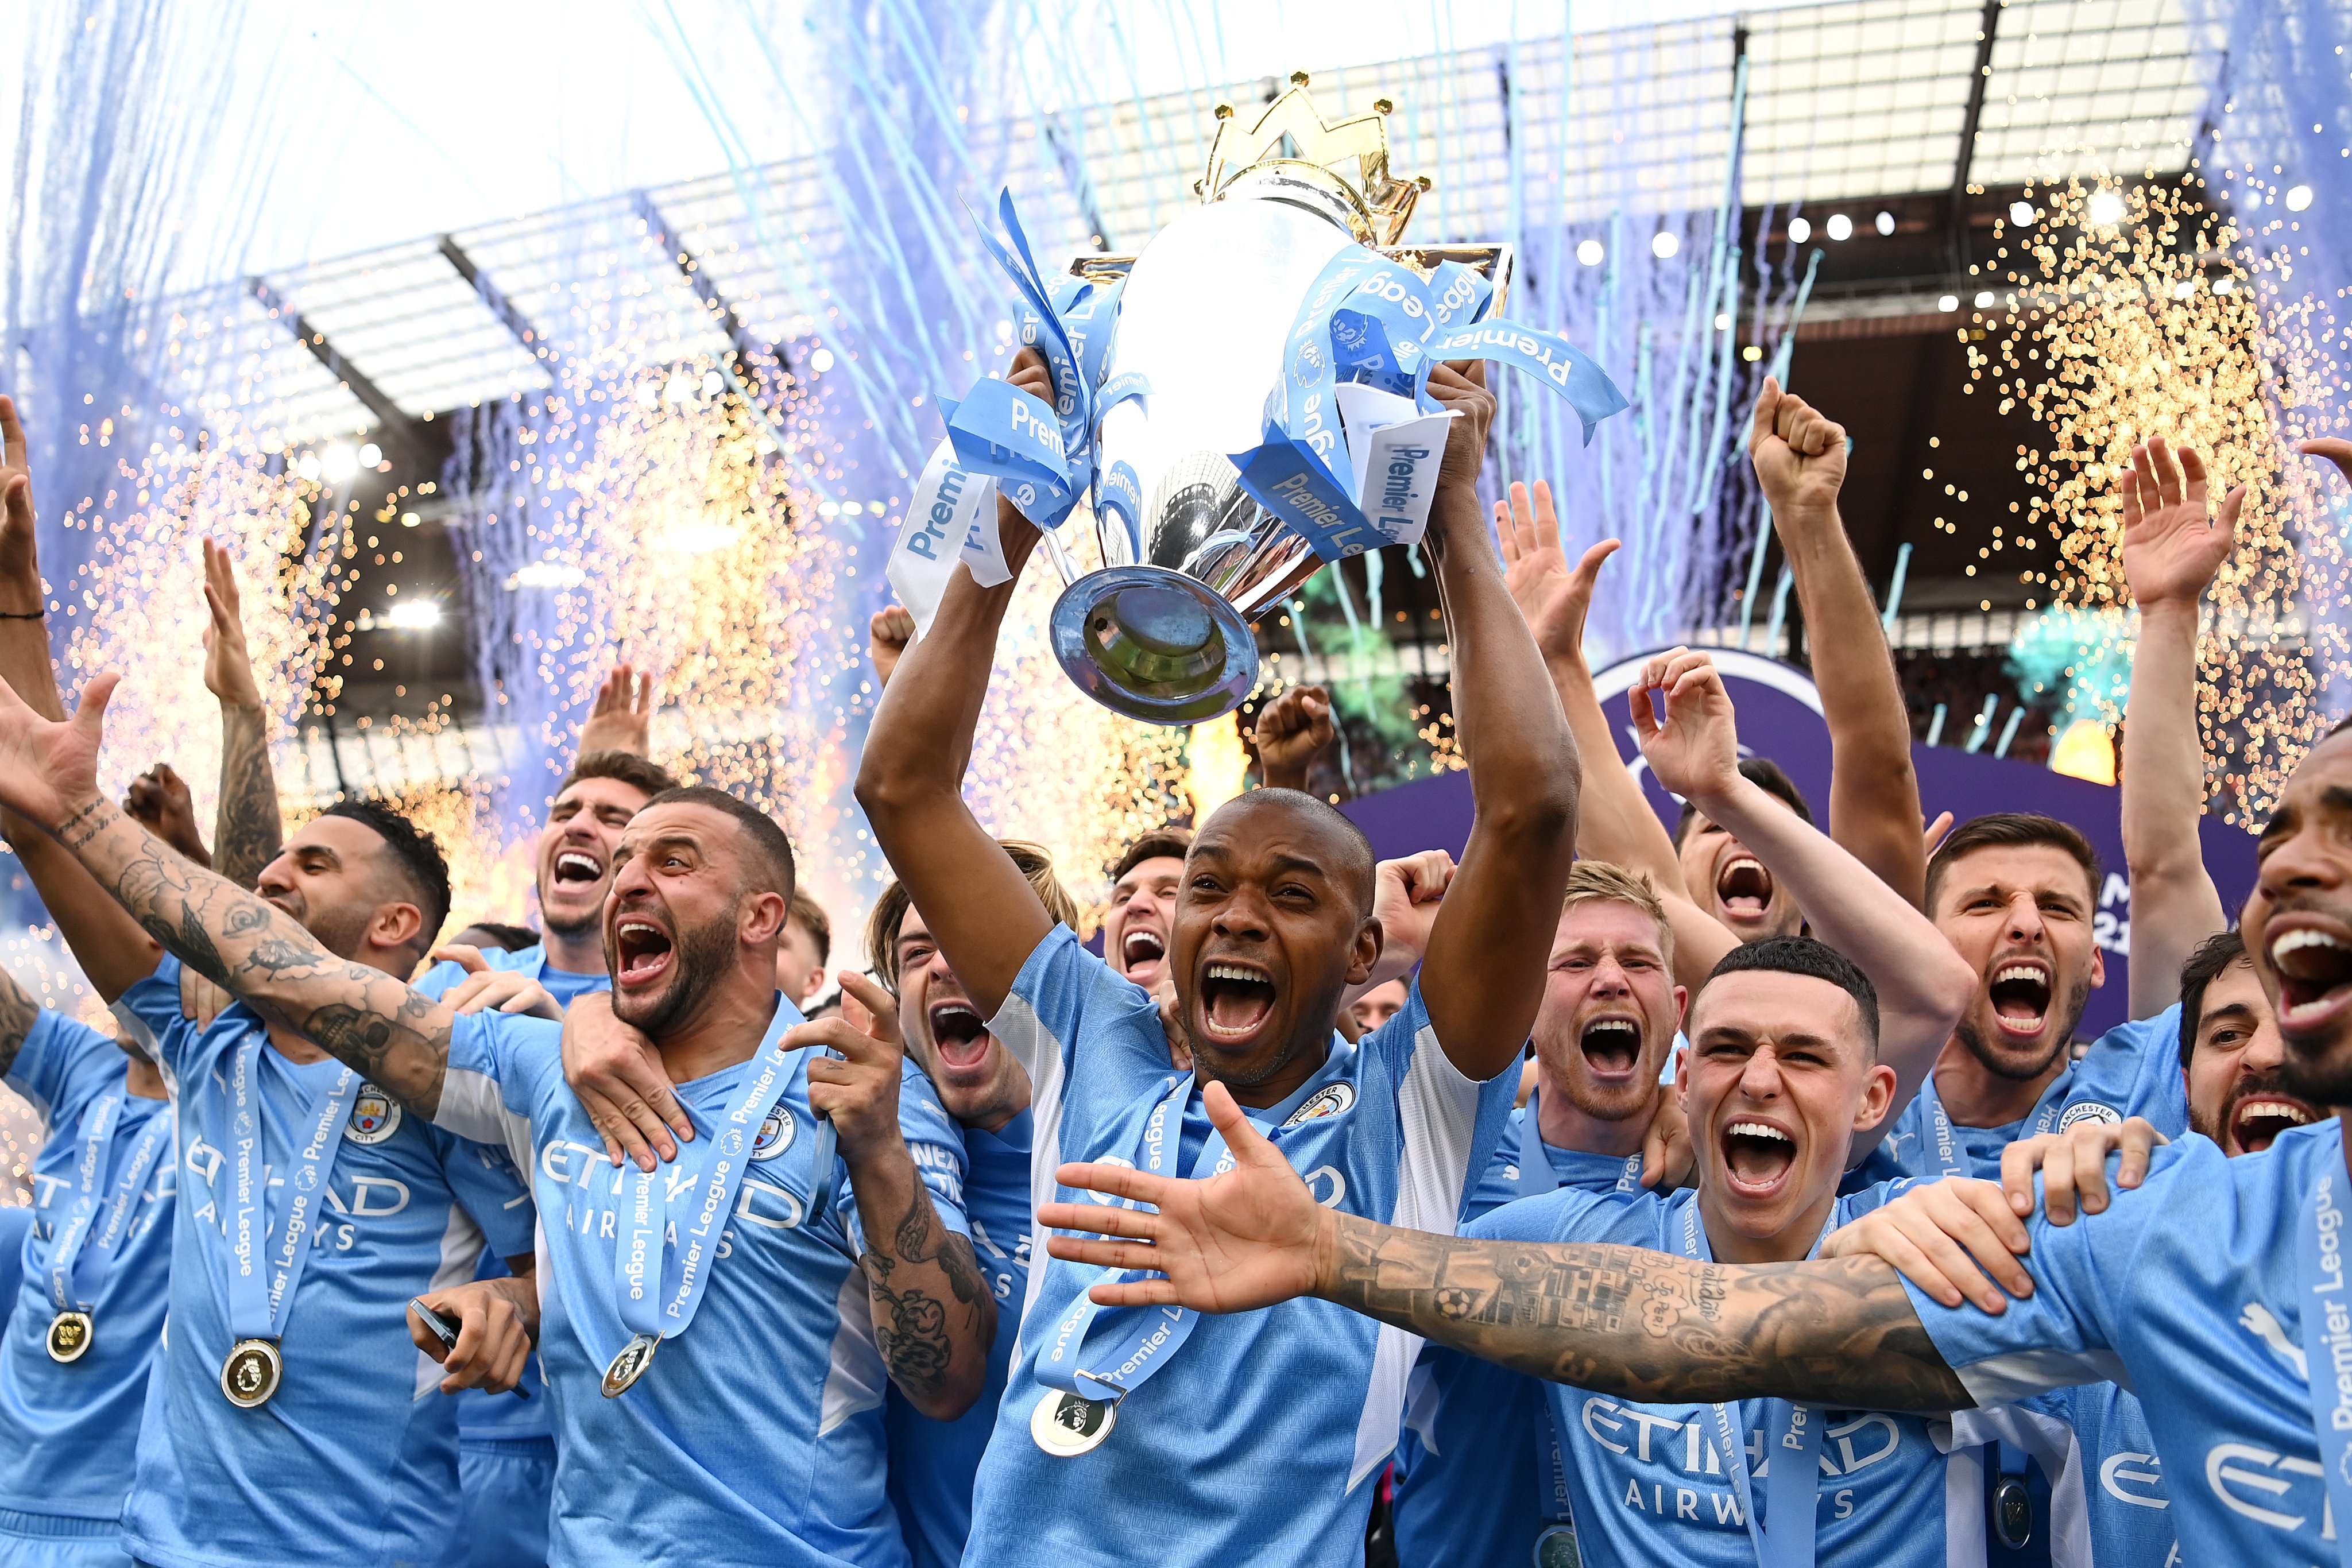 Premier League: Manchester City are crowned 2021/22 Premier League CHAMPIONS in dramatic 3-2 comeback against Aston Villa, Burnley RELEGATED as Leeds United survive